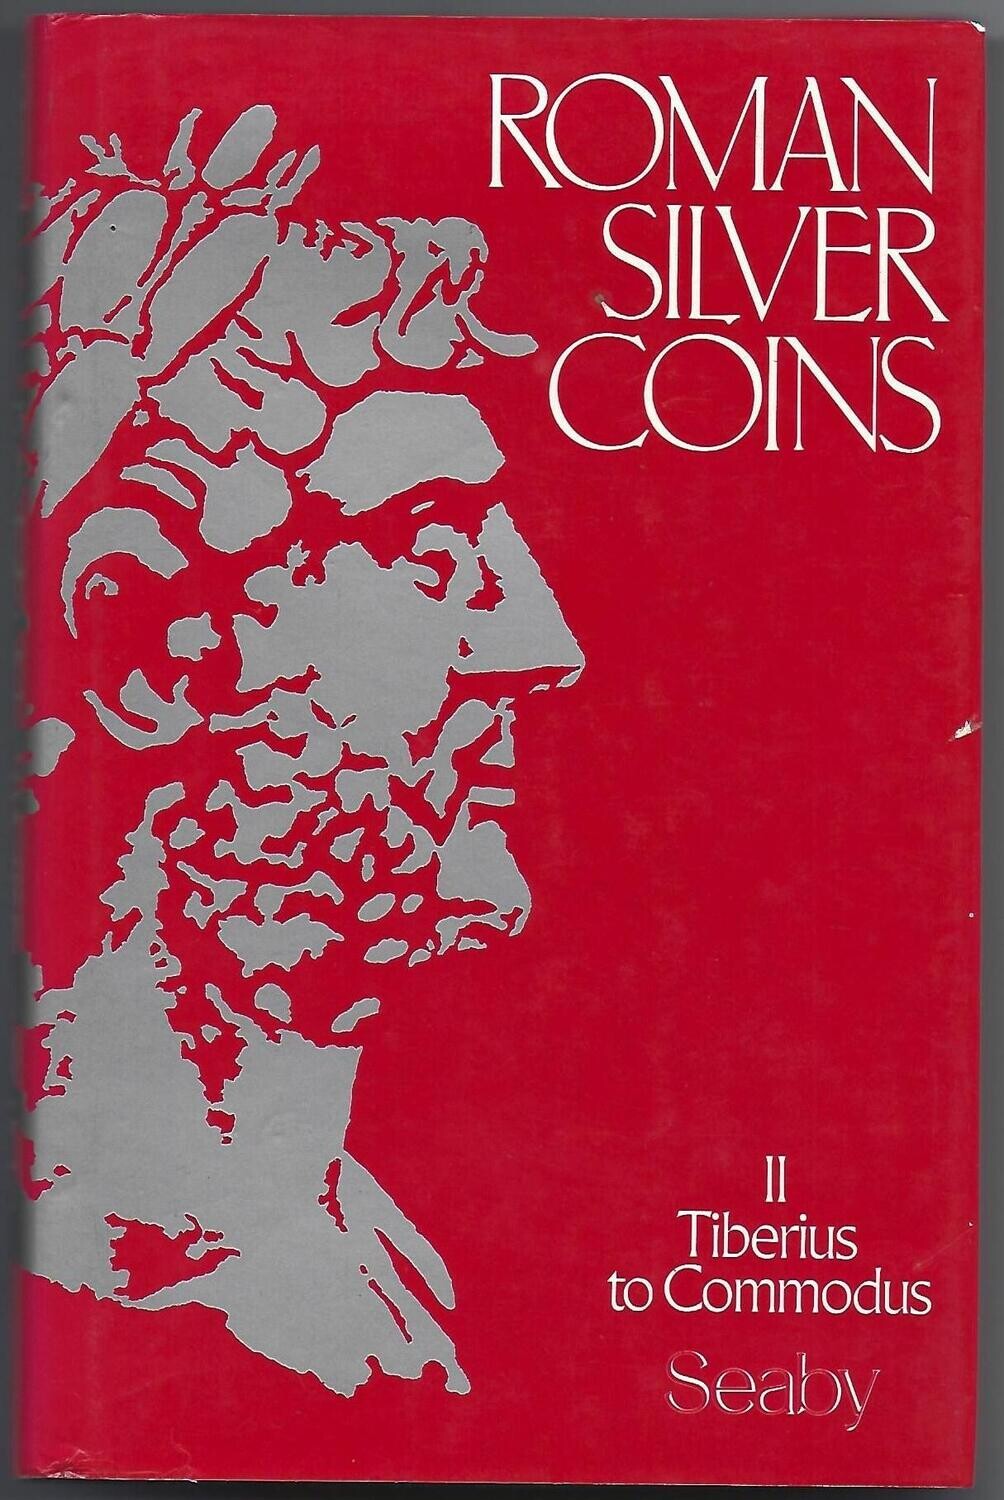 Ancients; H.A. Seaby, "Roman Silver Coins, Volume II."